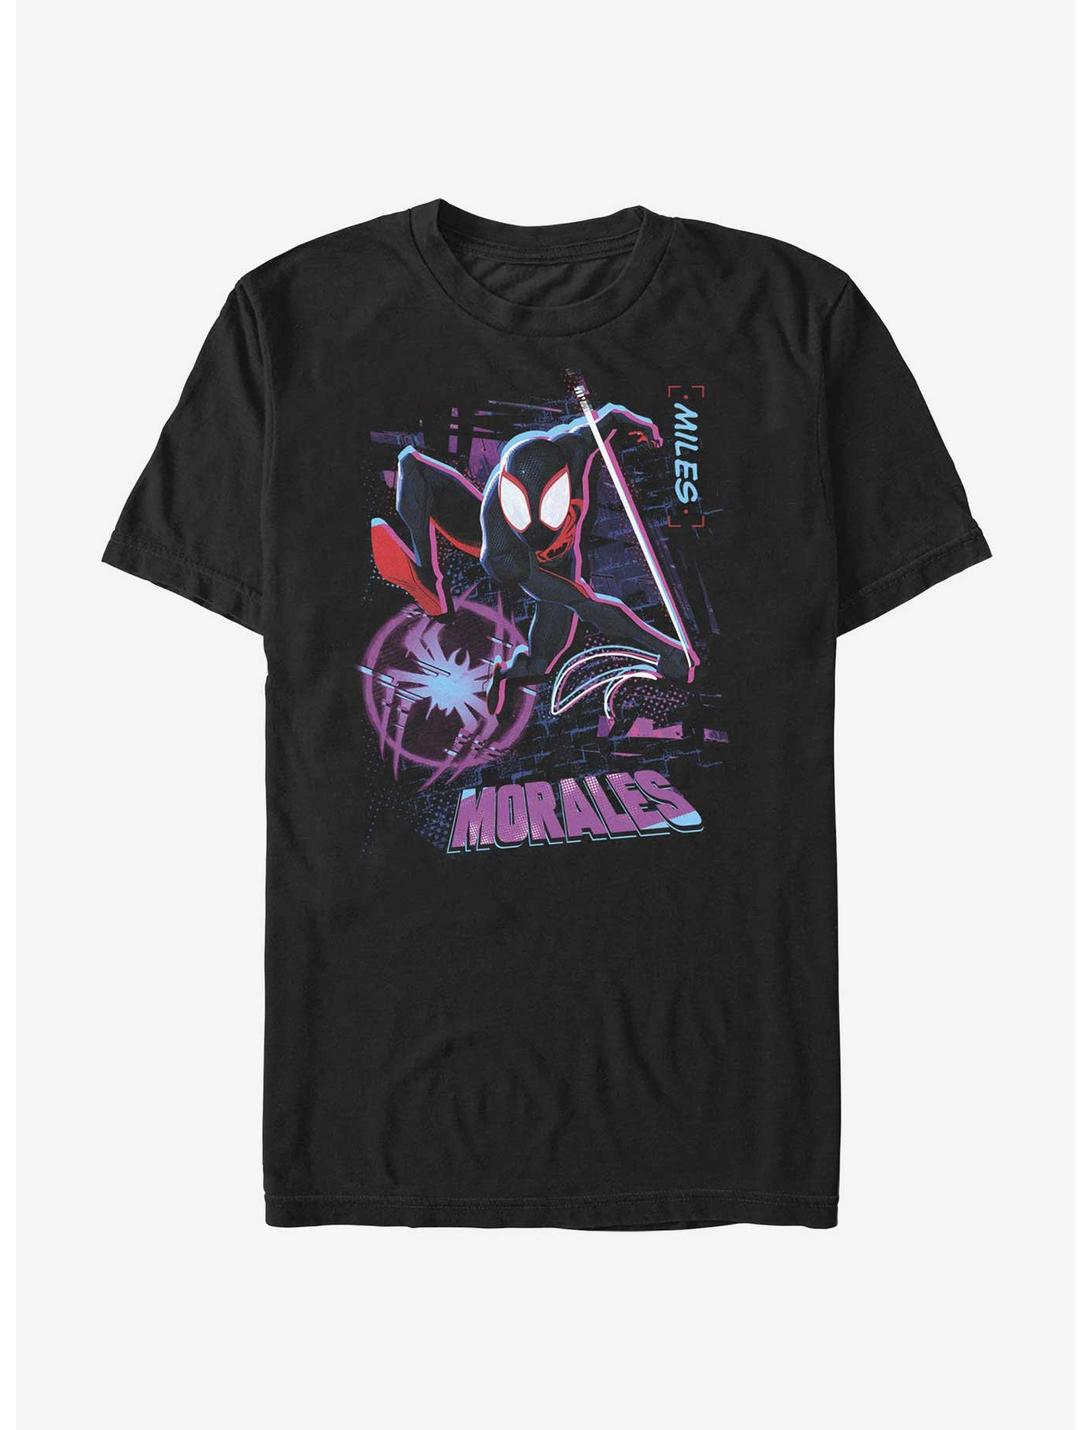 Marvel Spider-Man: Across the Spider-Verse Street Swing T-Shirt BoxLunch Web Exclusive, BLACK, hi-res